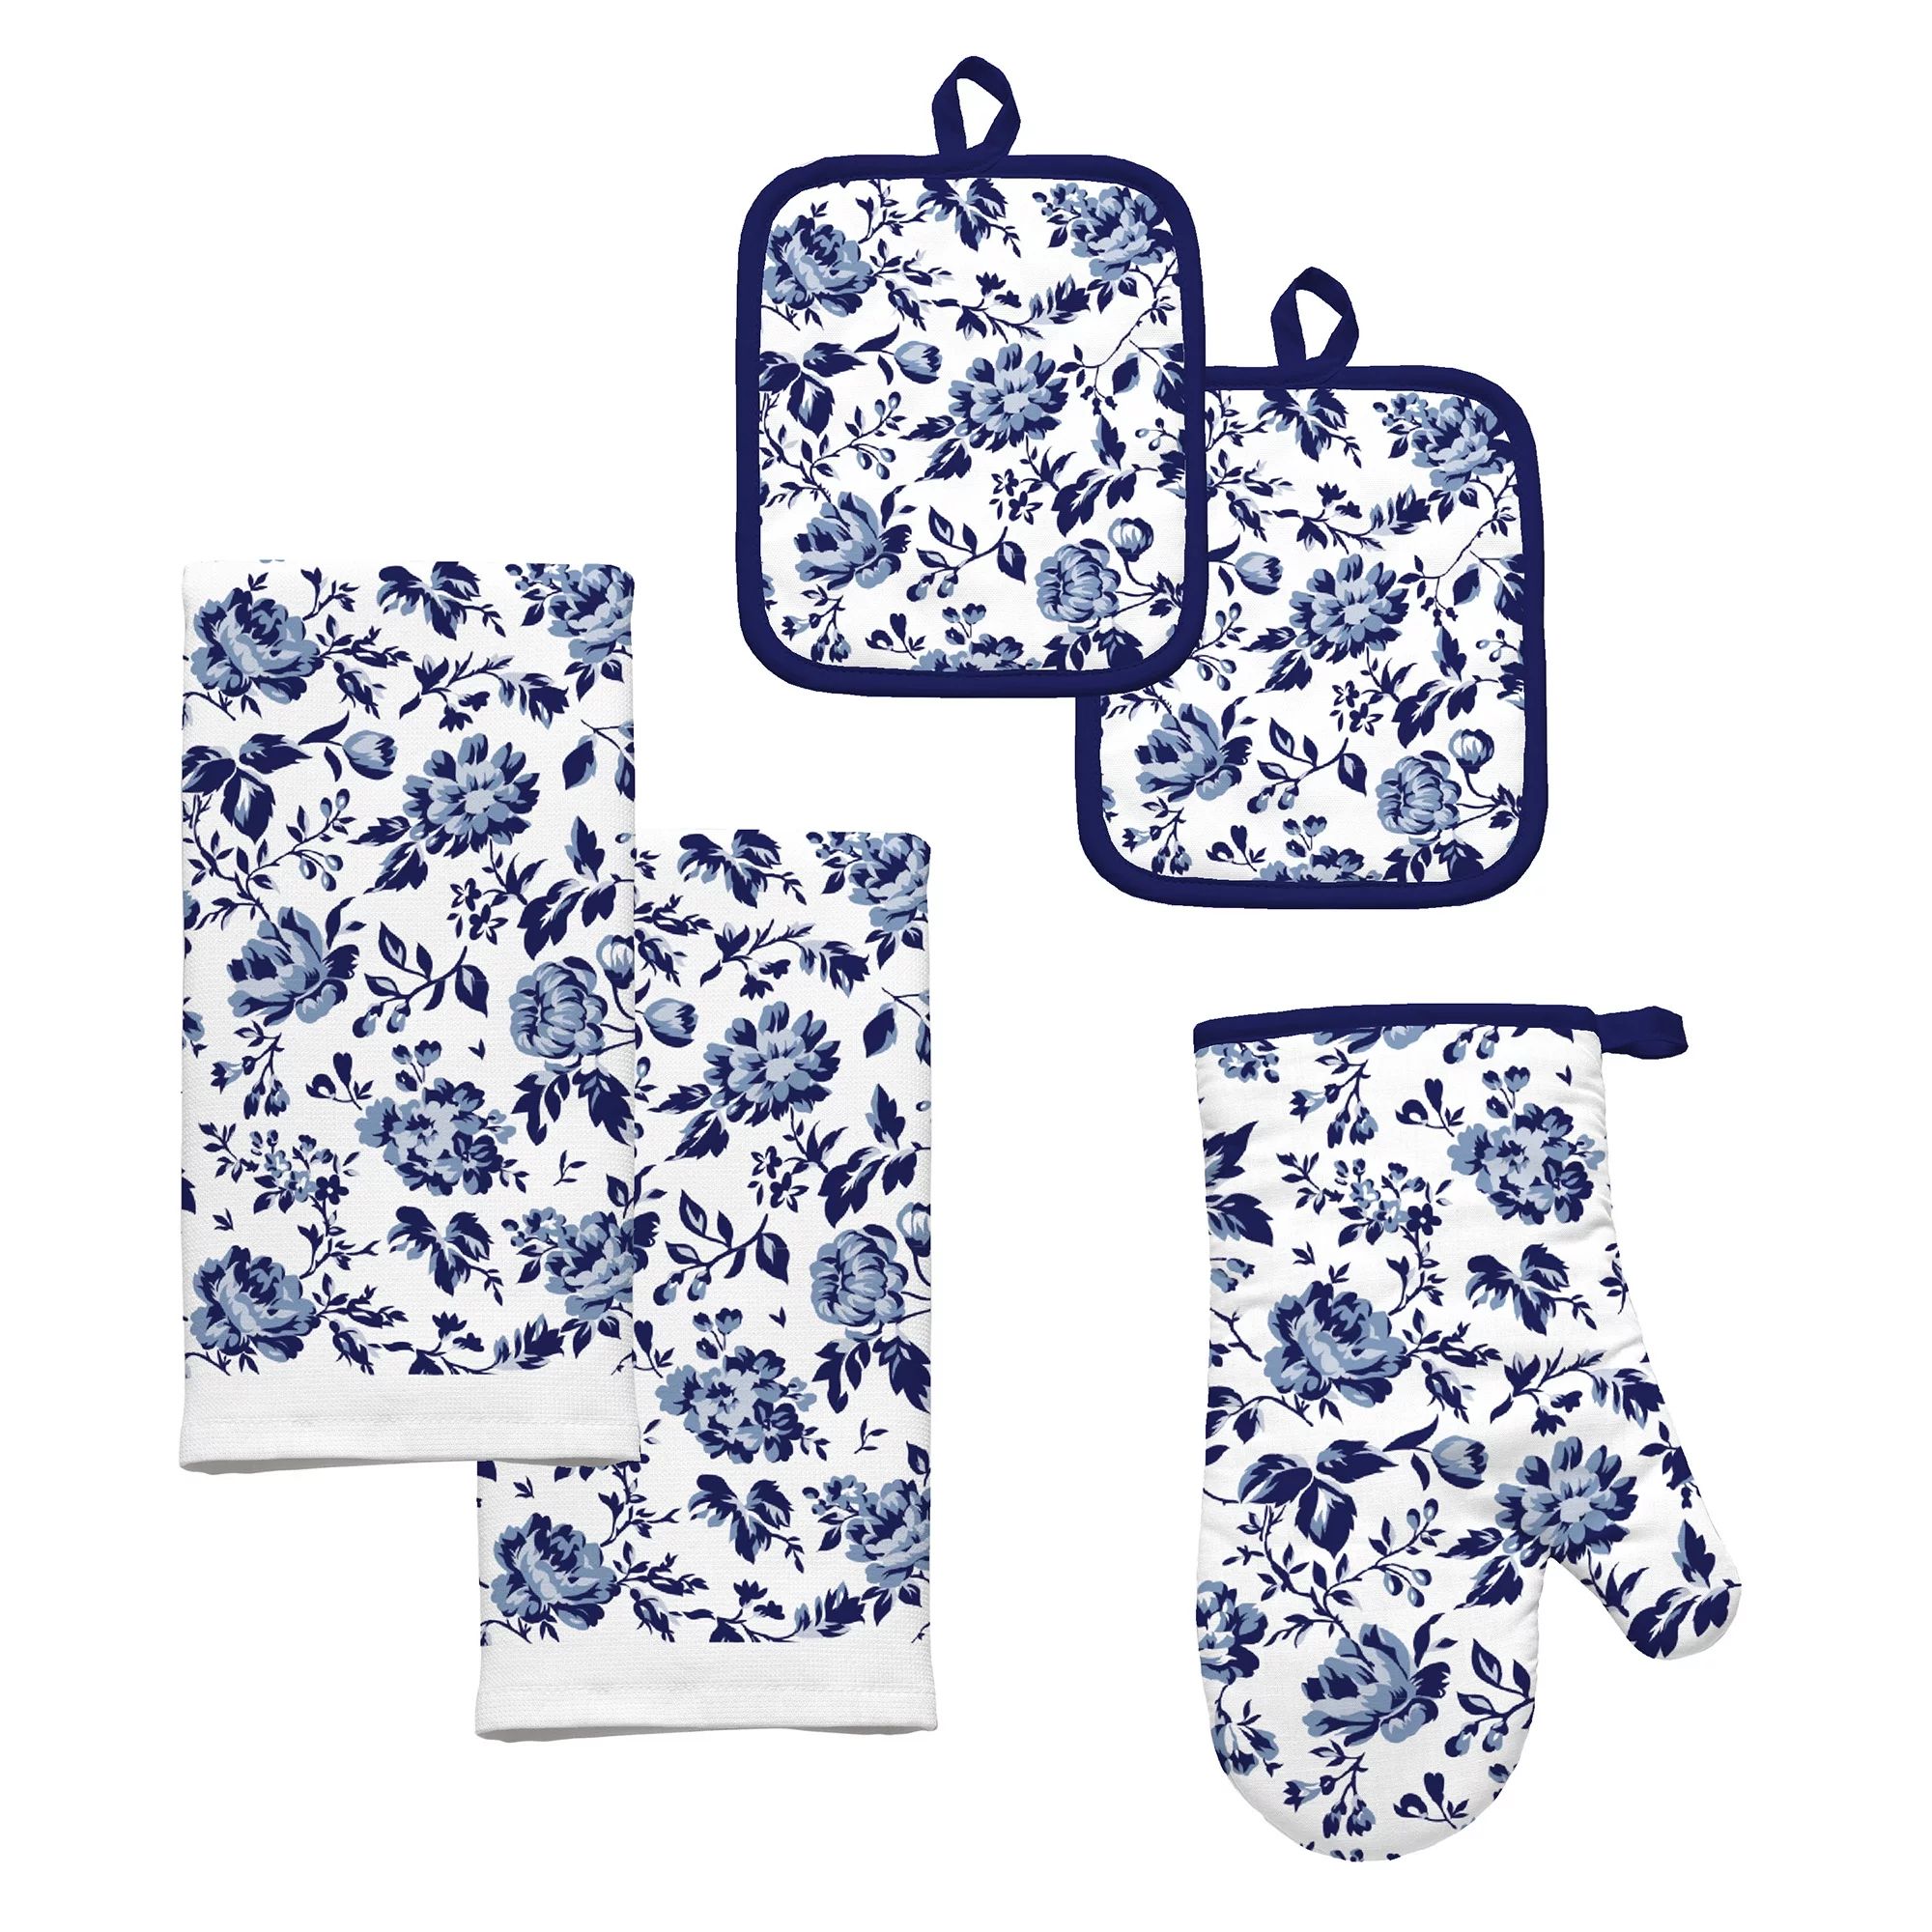 Mainstays Cotton Kitchen Towels, Pot Holders, and Oven Mitt Set, Floral Blooms, Navy, 5-Piece - W... | Walmart (US)